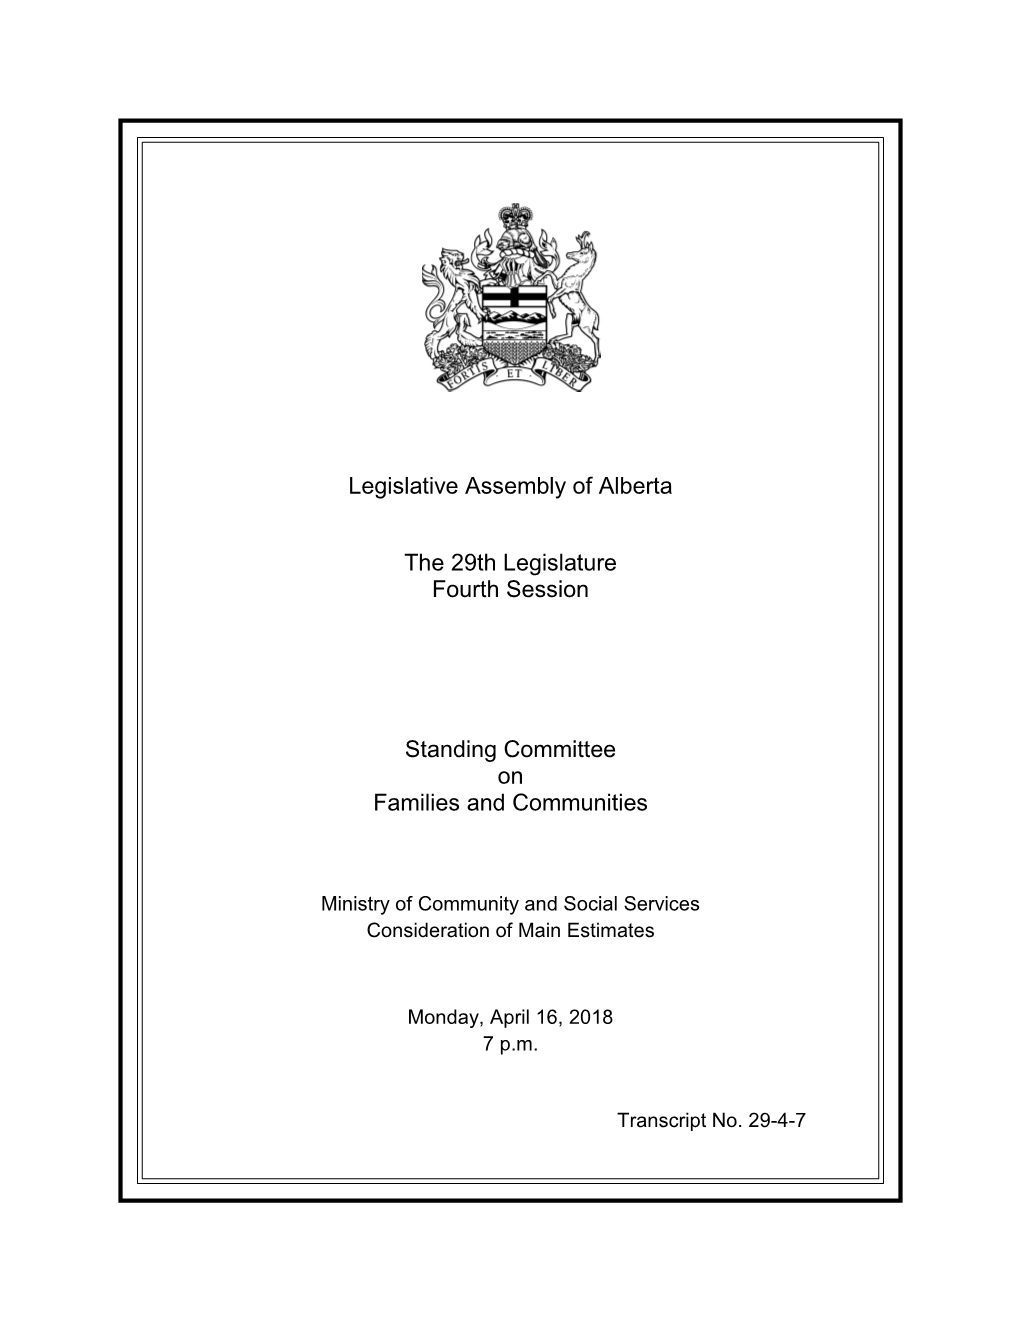 Legislative Assembly of Alberta the 29Th Legislature Fourth Session Standing Committee on Families and Communities